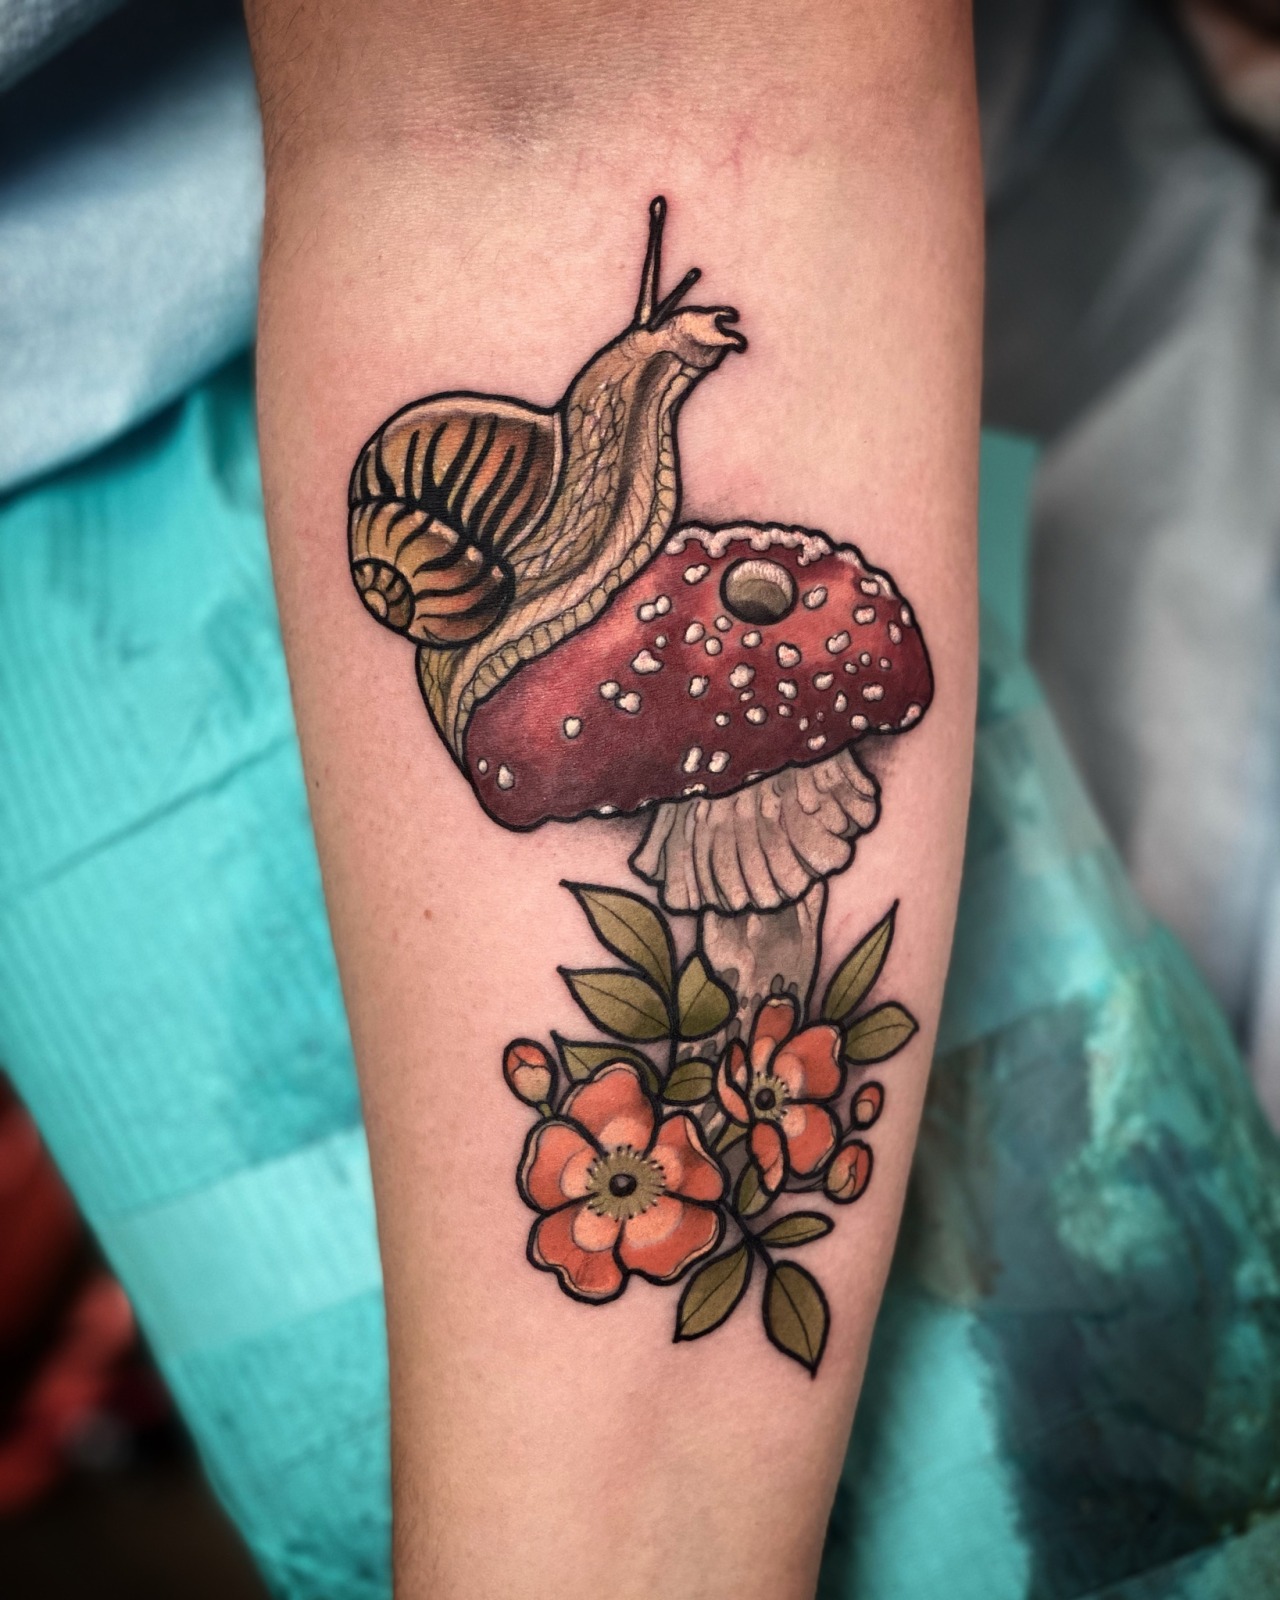 The Tattoo Shop on Twitter Yesssss You know we love a snail tattoo here  at Tattoo Shop Look at this guy primm   tattooshop tattoosupplies  handtattoo snailtattoo tattoo colourtattoo animaltattoo neotrad 